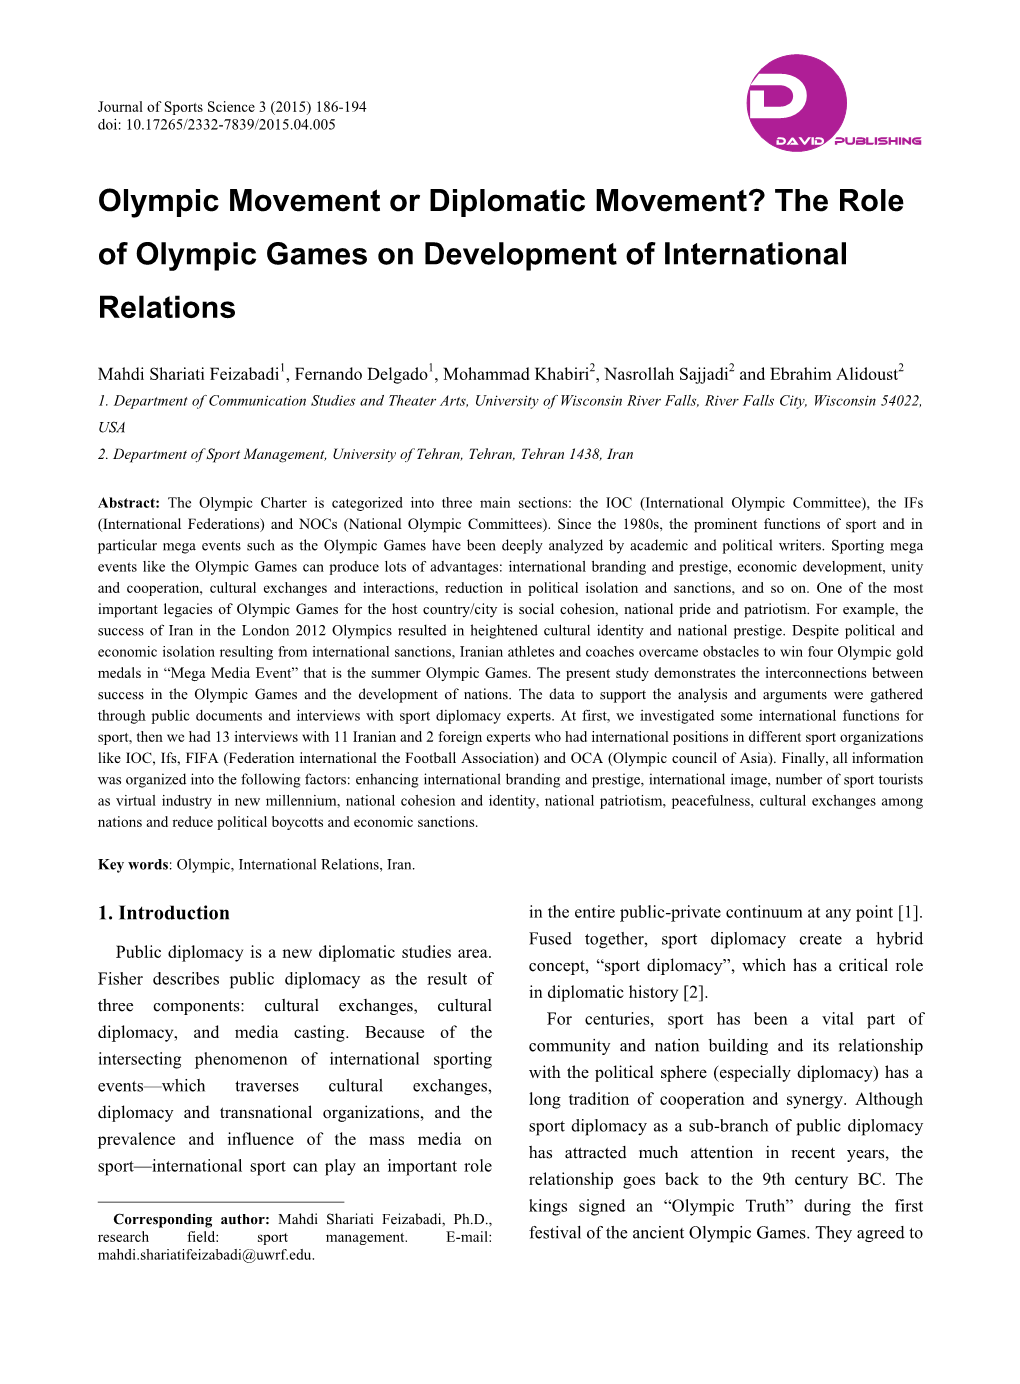 Olympic Movement Or Diplomatic Movement? the Role of Olympic Games on Development of International Relations